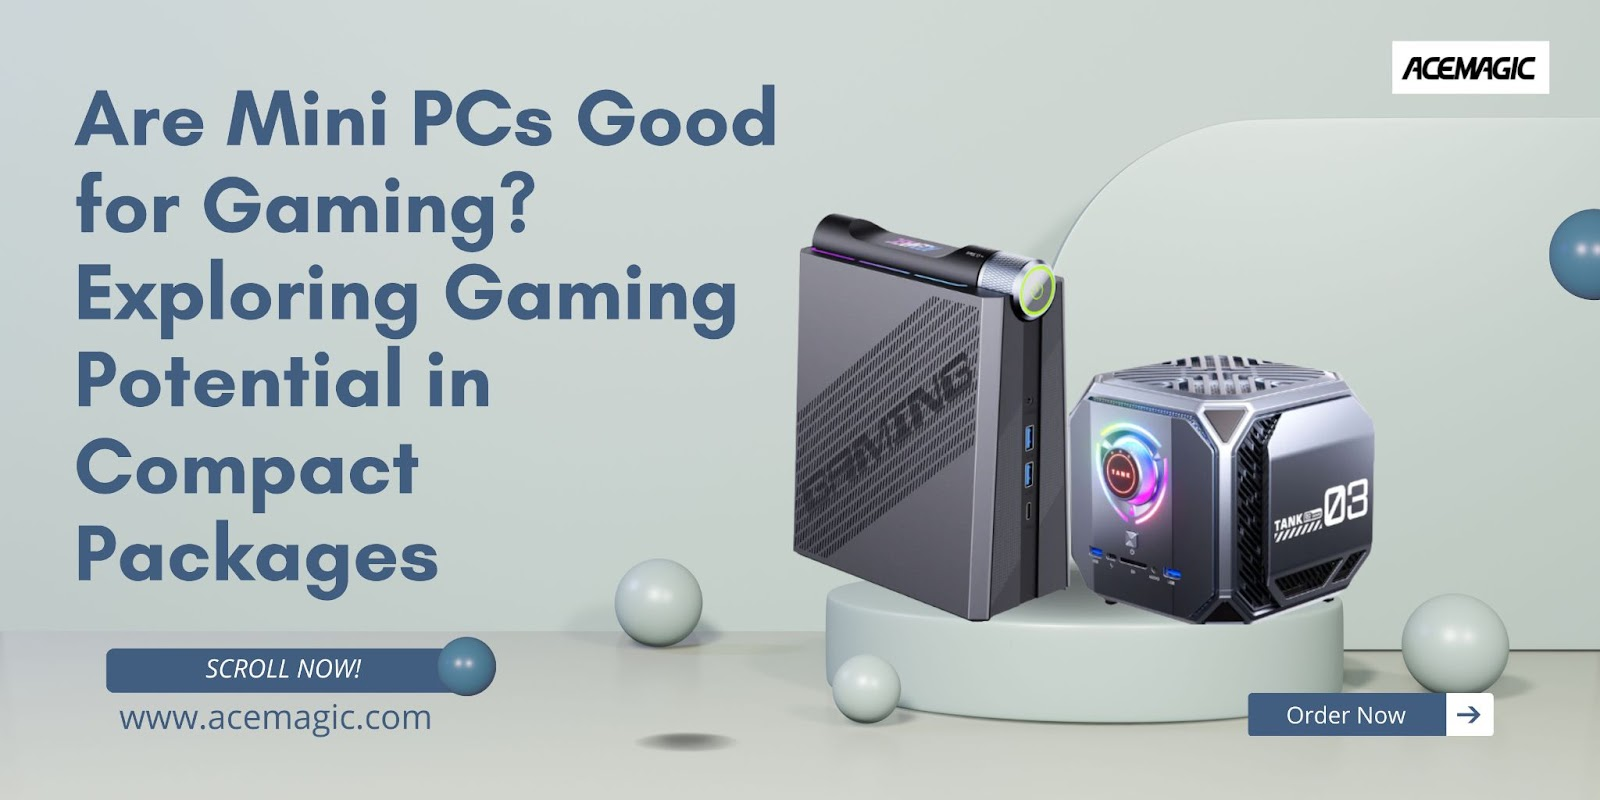 Are Mini PCs Good for Gaming? Exploring Gaming Potential in Compact Packages